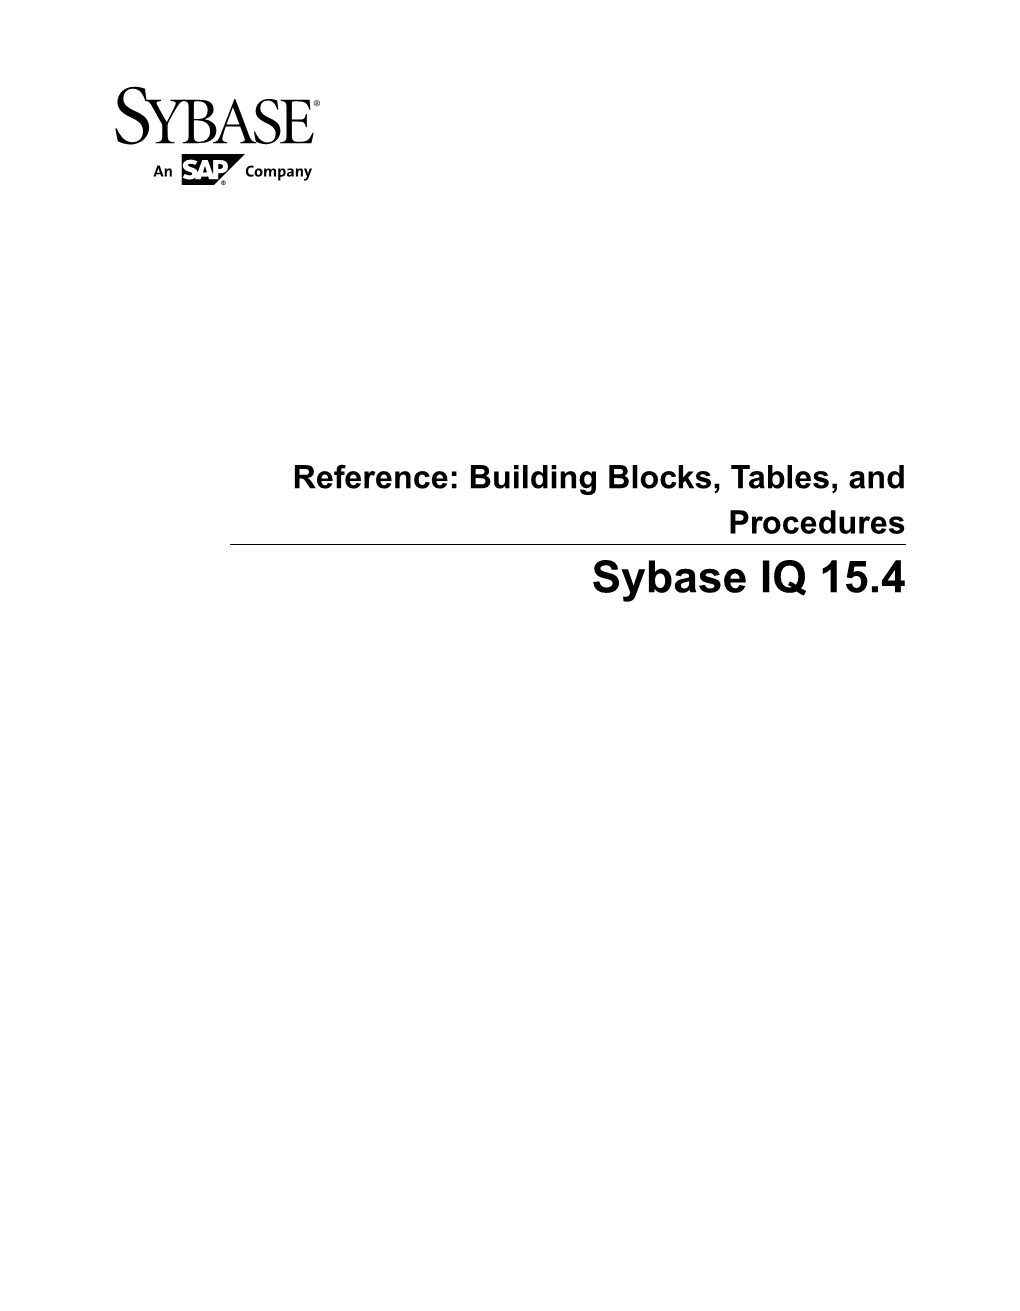 Reference: Building Blocks, Tables, and Procedures Sybase IQ 15.4 DOCUMENT ID: DC38151-01-1540-02 LAST REVISED: May 2012 Copyright © 2012 by Sybase, Inc